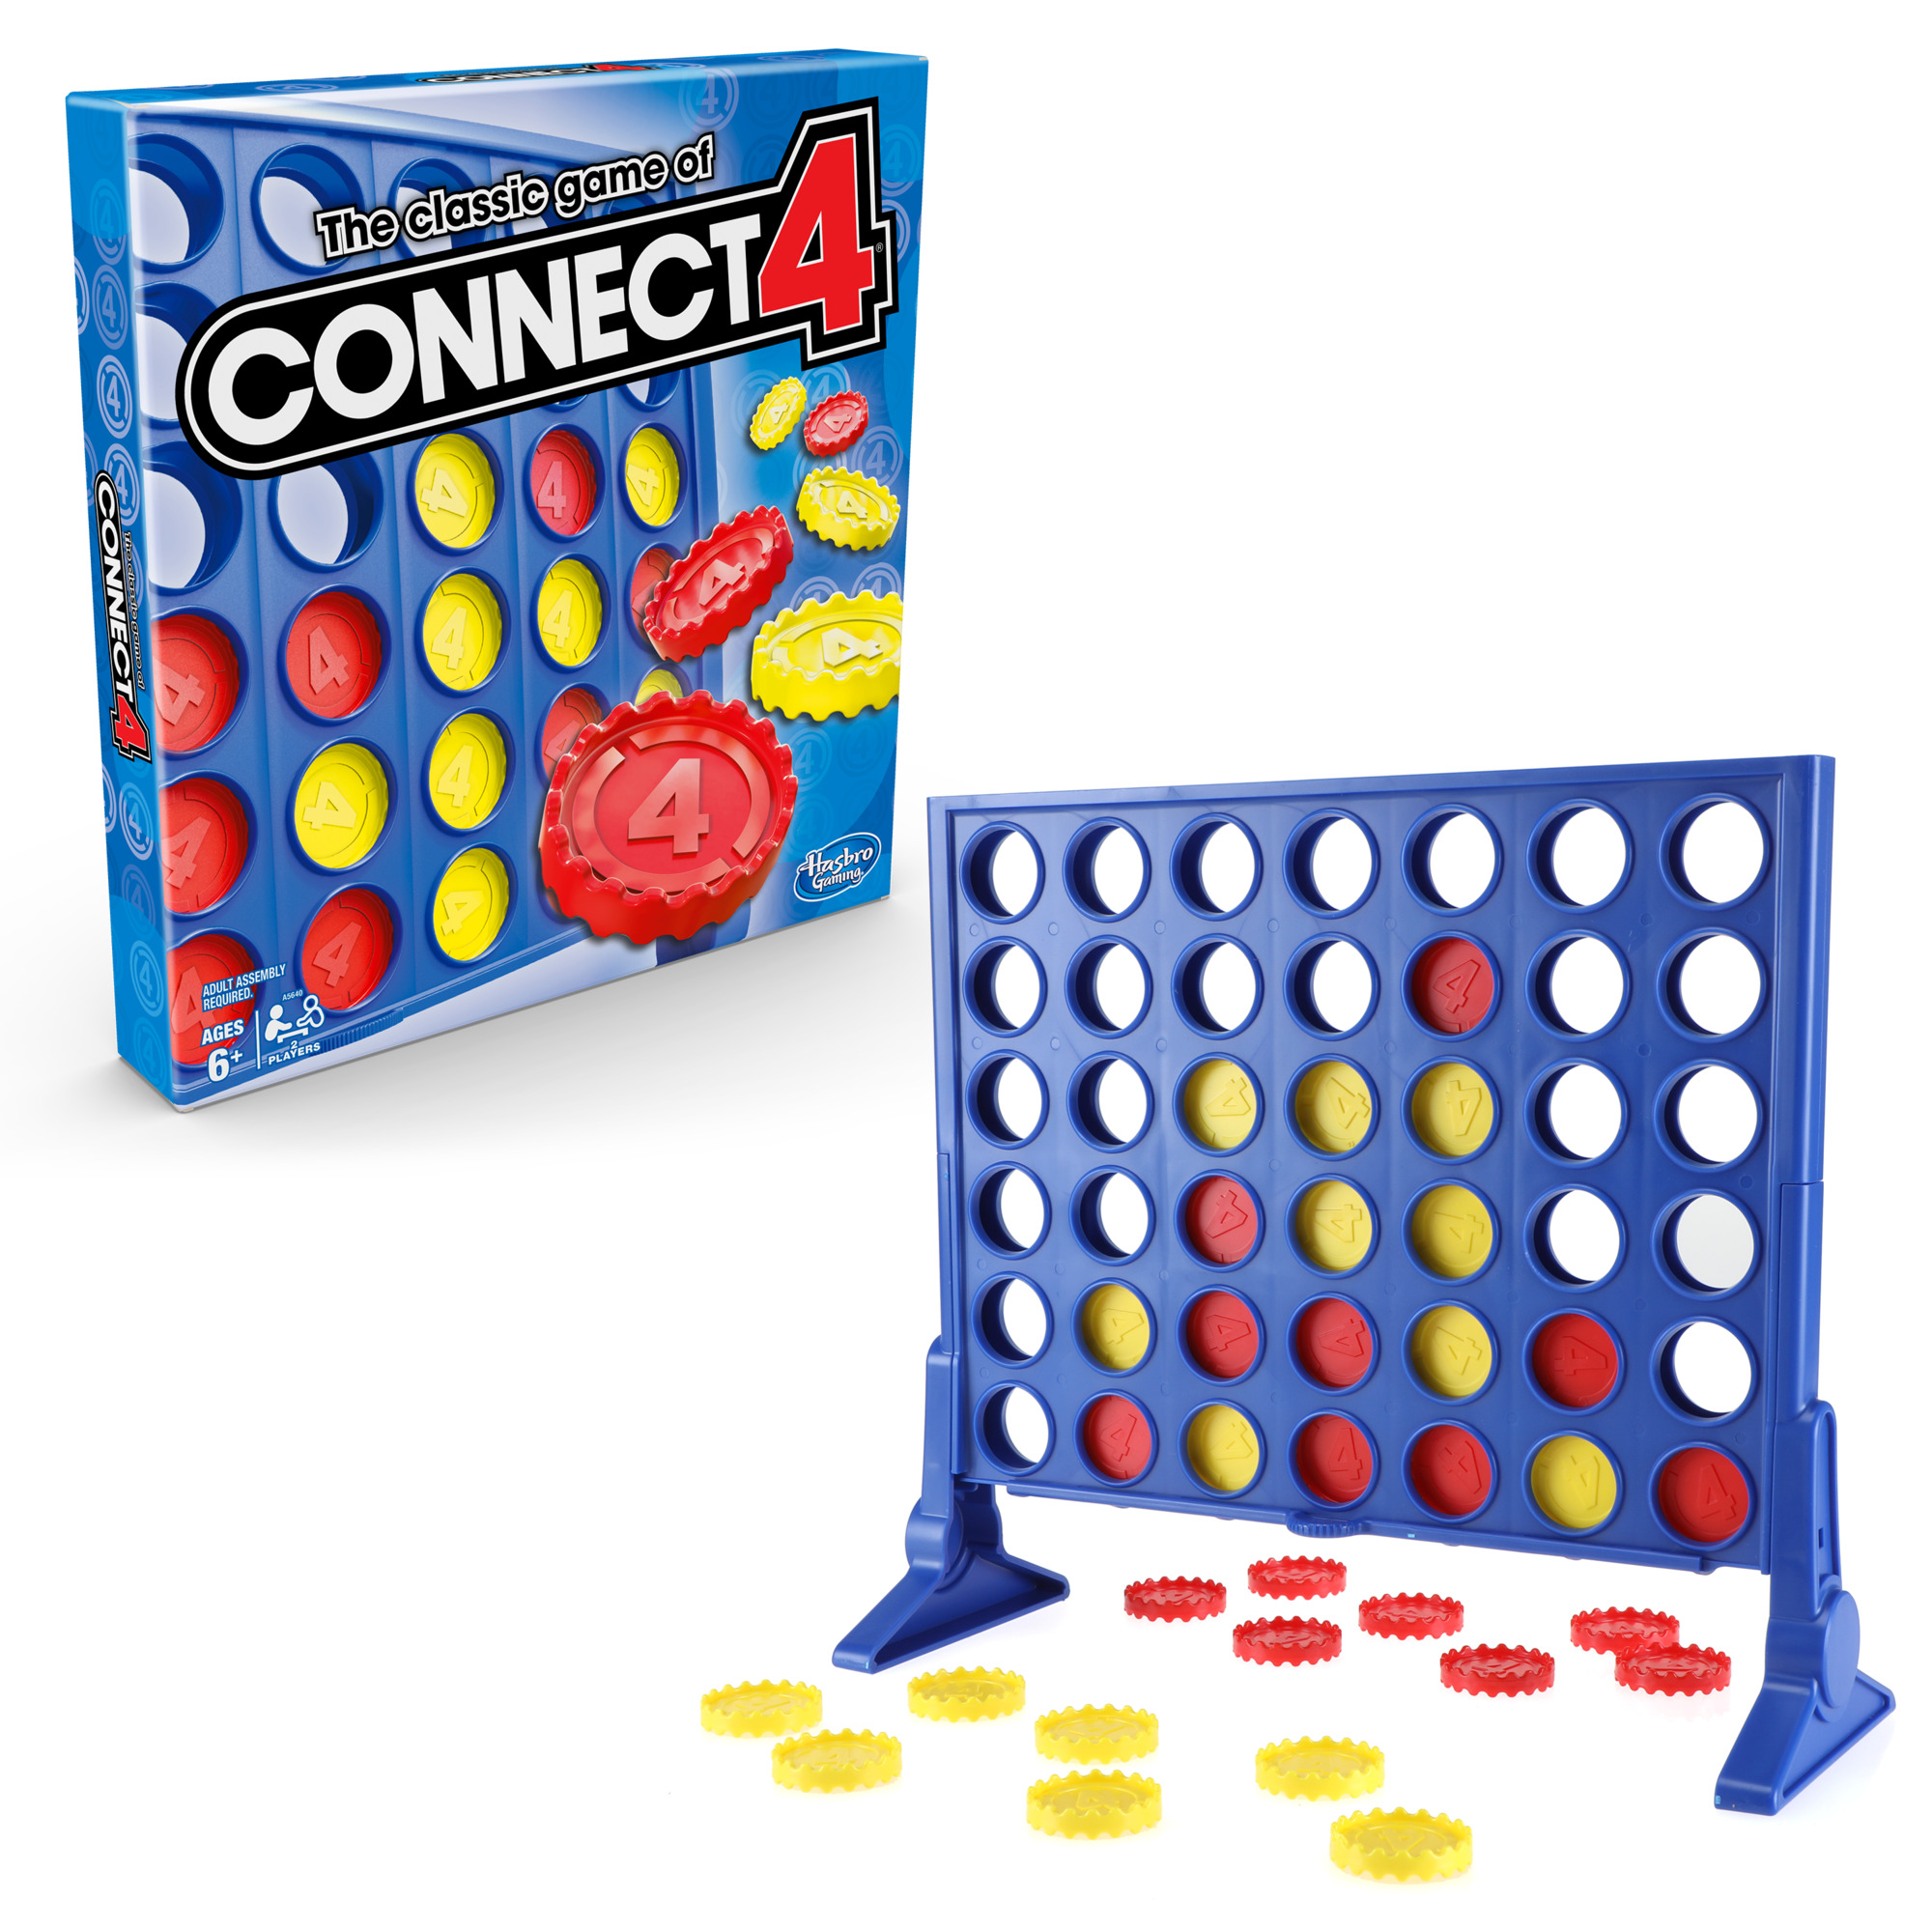 Hasbro Connect 4 Game $5.90!